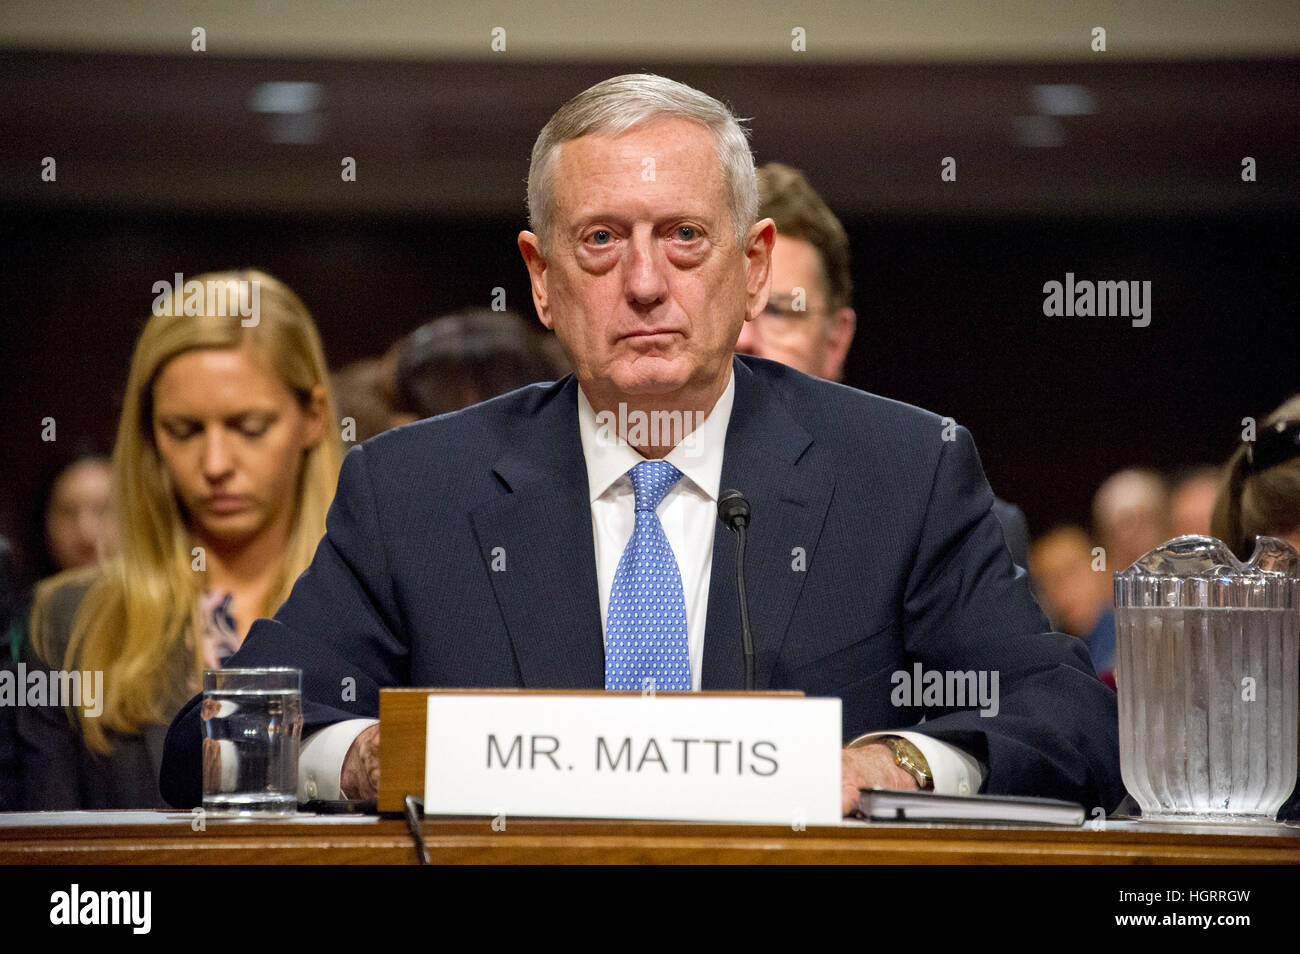 Washington DC, USA. 12th January 2017. United States Marine Corps General James N. Mattis (retired) testifies before the US Senate Committee on Armed Services during his confirmation hearing to be Secretary of Defense on Capitol Hill in Washington, DC on Thursday, January 12, 2017. Credit: MediaPunch Inc/Alamy Live News Stock Photo